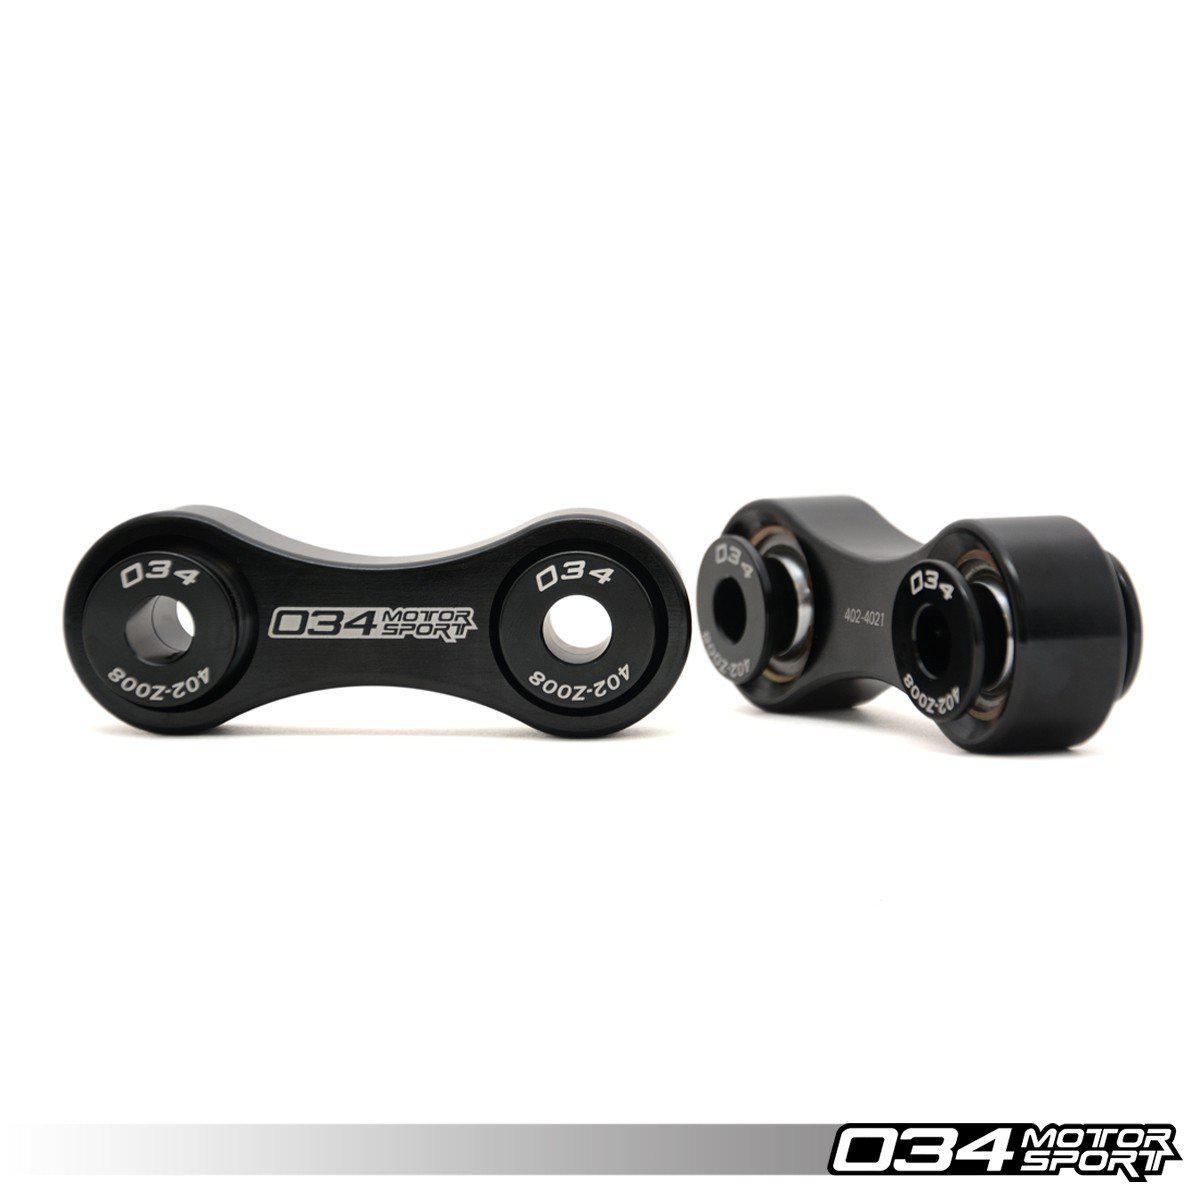 Spherical Rear Sway Bar End Links, C5 Audi A6/S6/RS6 & Allroad, B5/B5.5 Volkswagen Passat 4motion-A Little Tuning Co